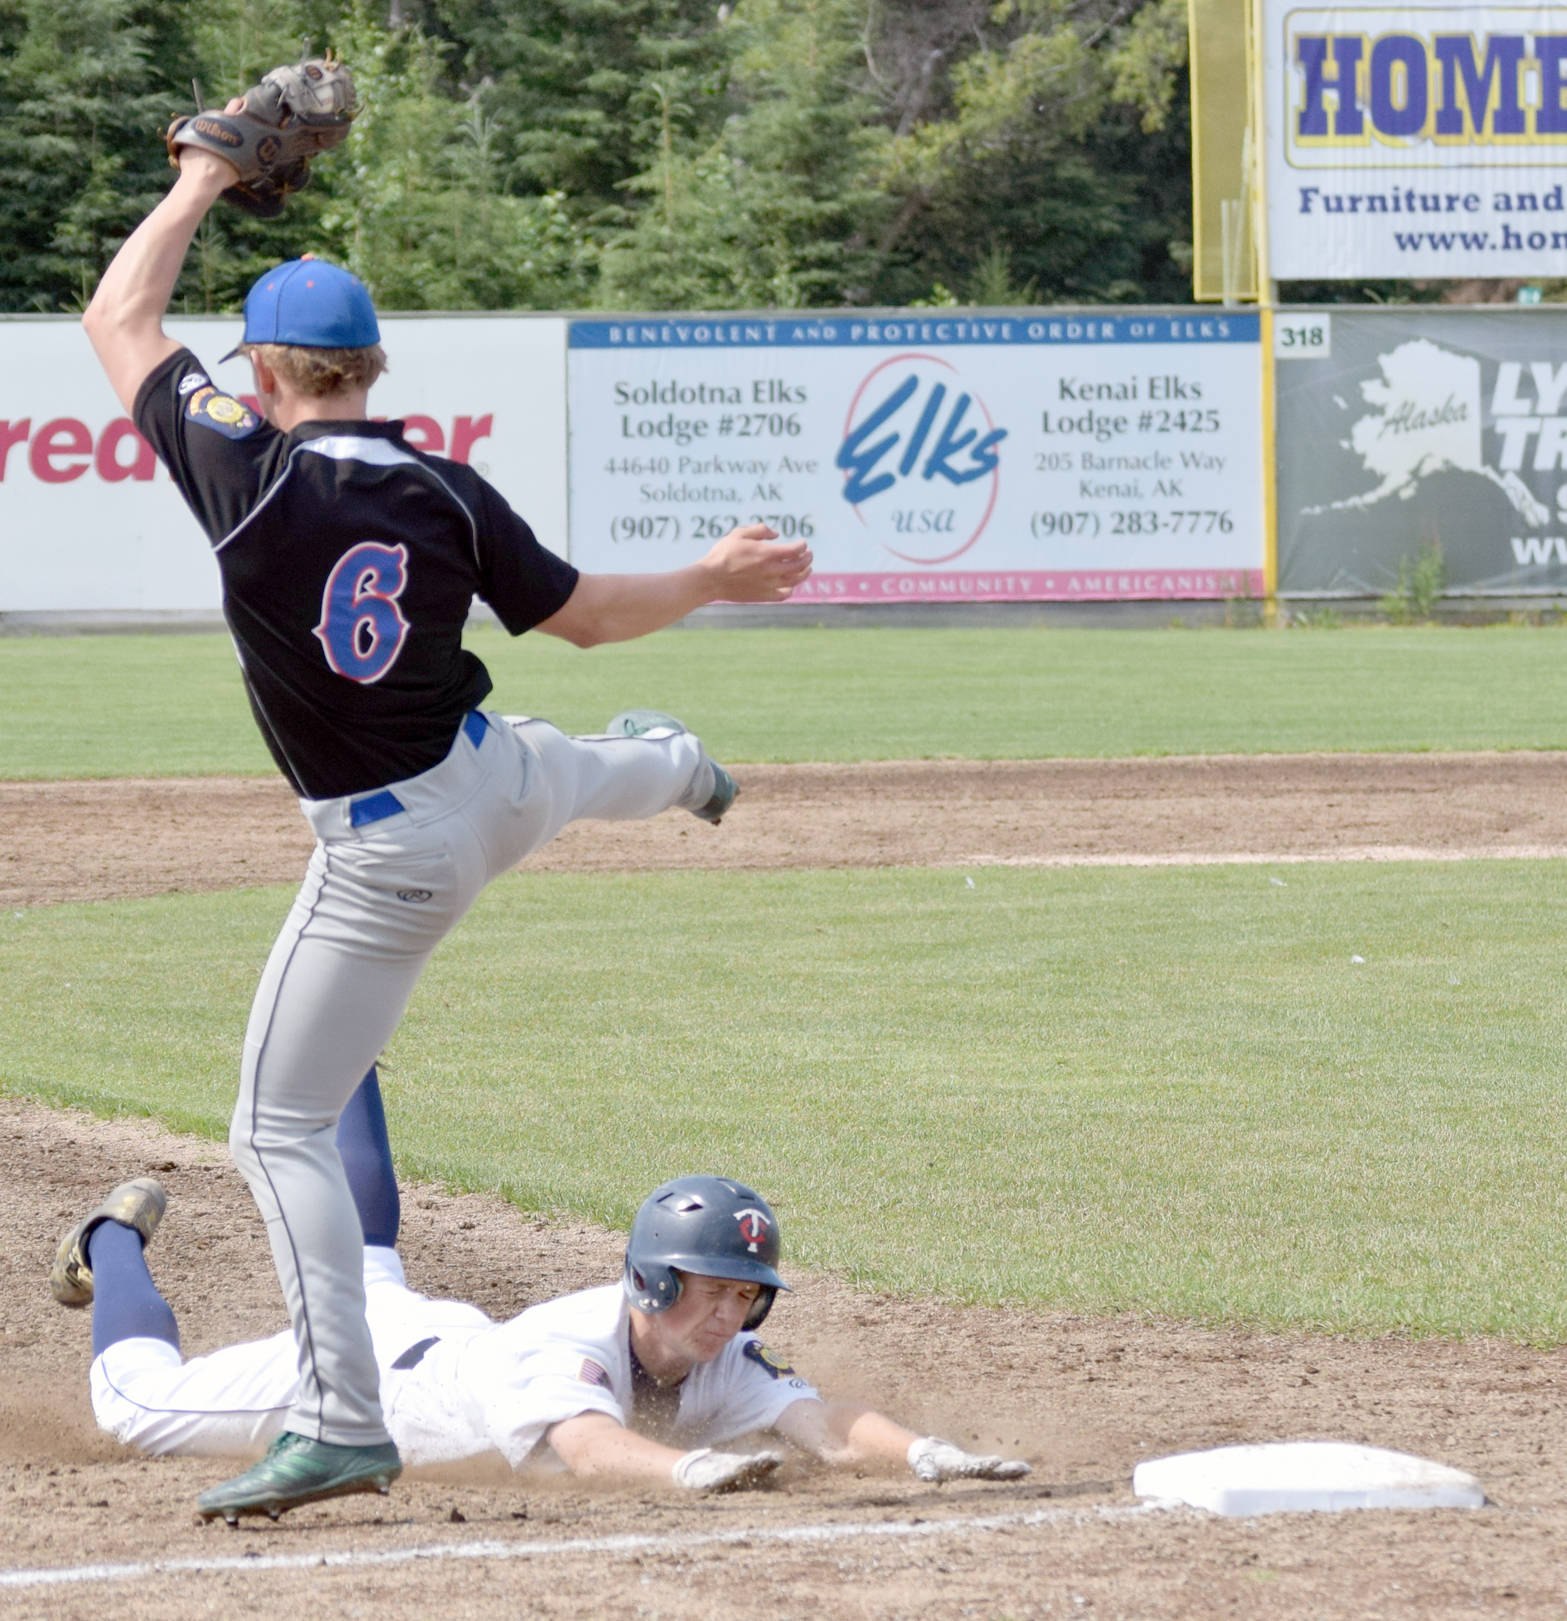 Harrison Metz of the Twins takes third base by sliding under Palmer third baseman Trace Severson on Sunday, July 15, 2018, at Coral Seymour Memorial Park in Kenai. (Photo by Jeff Helminiak/Peninsula Clarion)